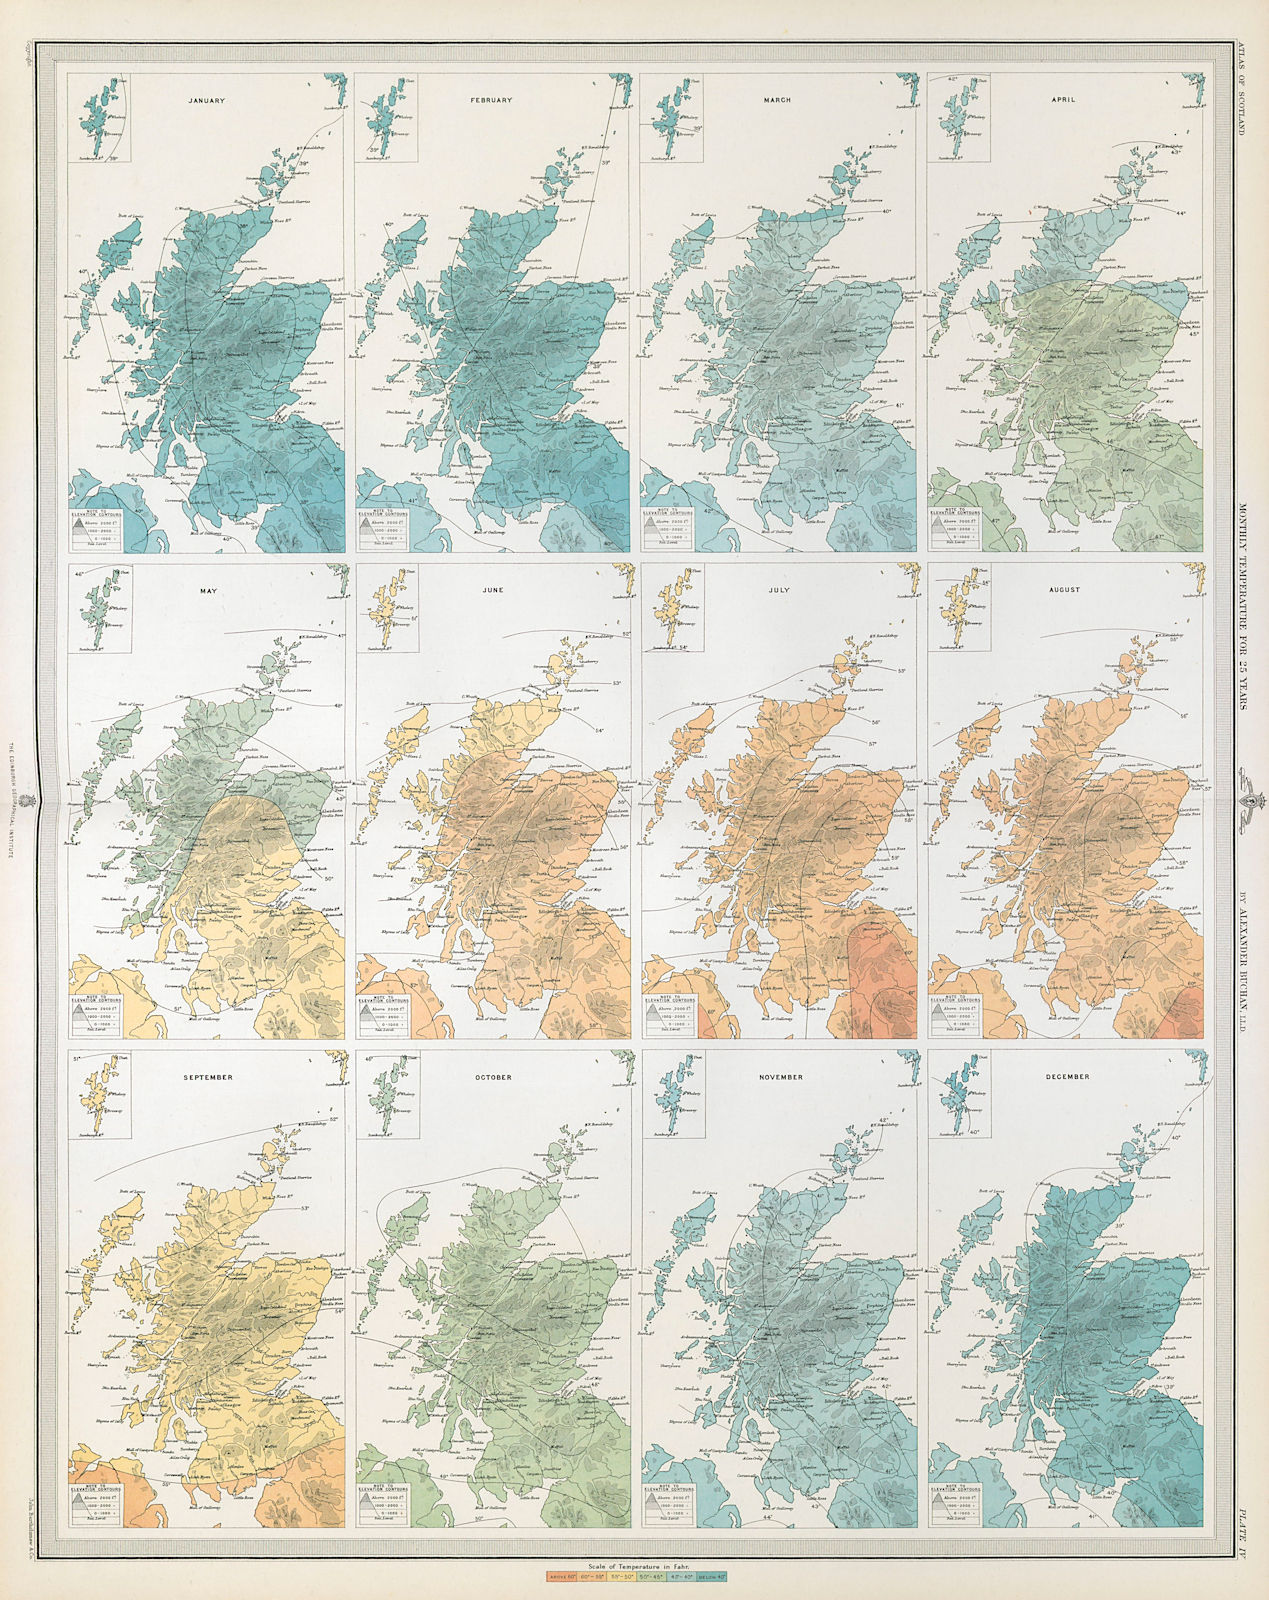 SCOTLAND average monthly temperature for 25 years by Alexander Buchan 1895 map